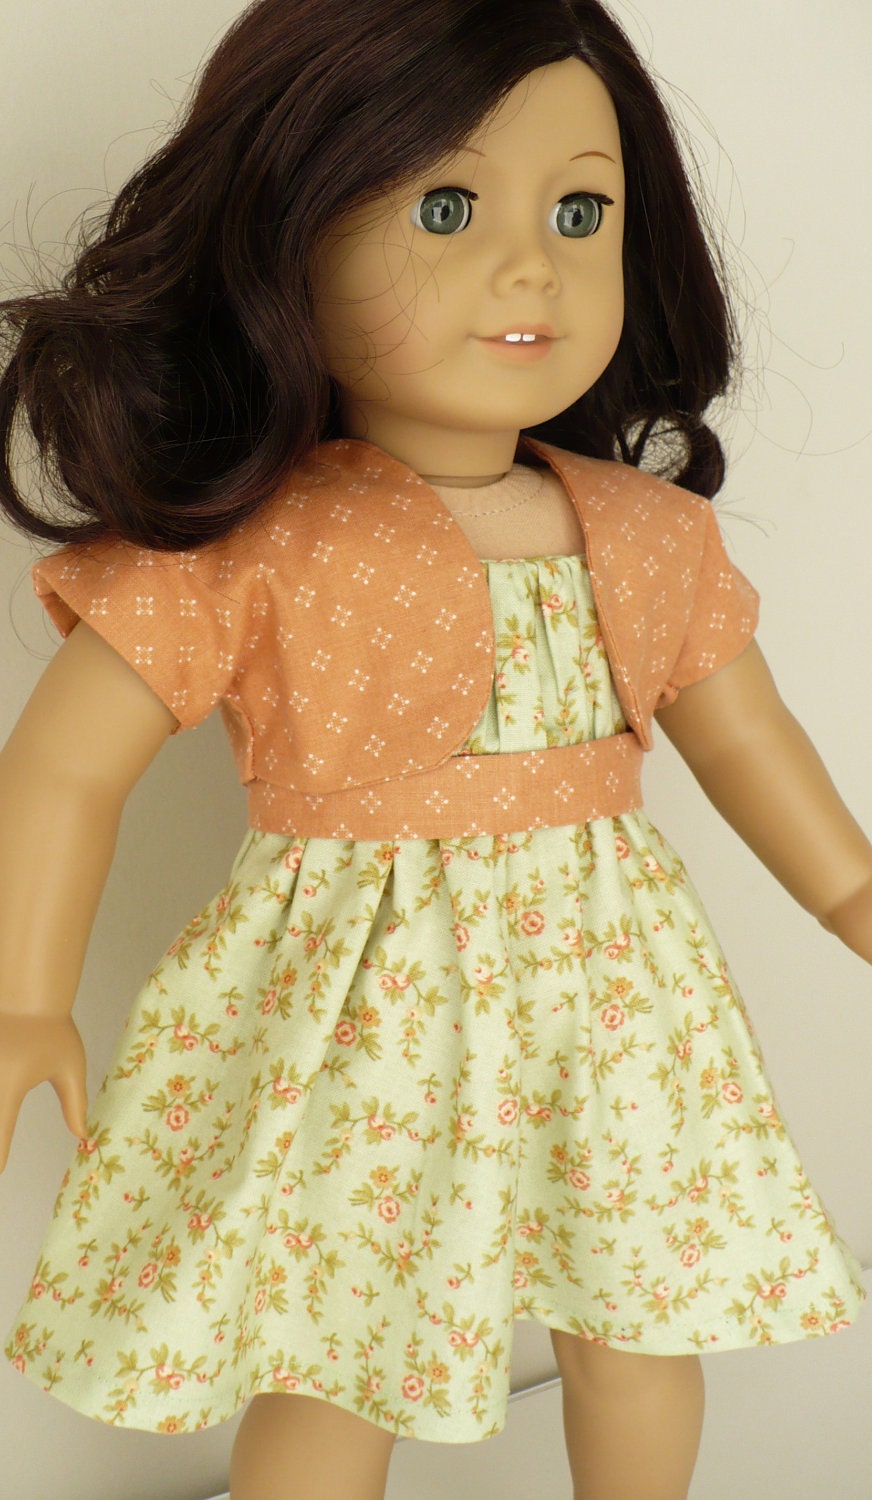 American Girl 18 inch doll clothes - two piece outfit -  dress and shrug